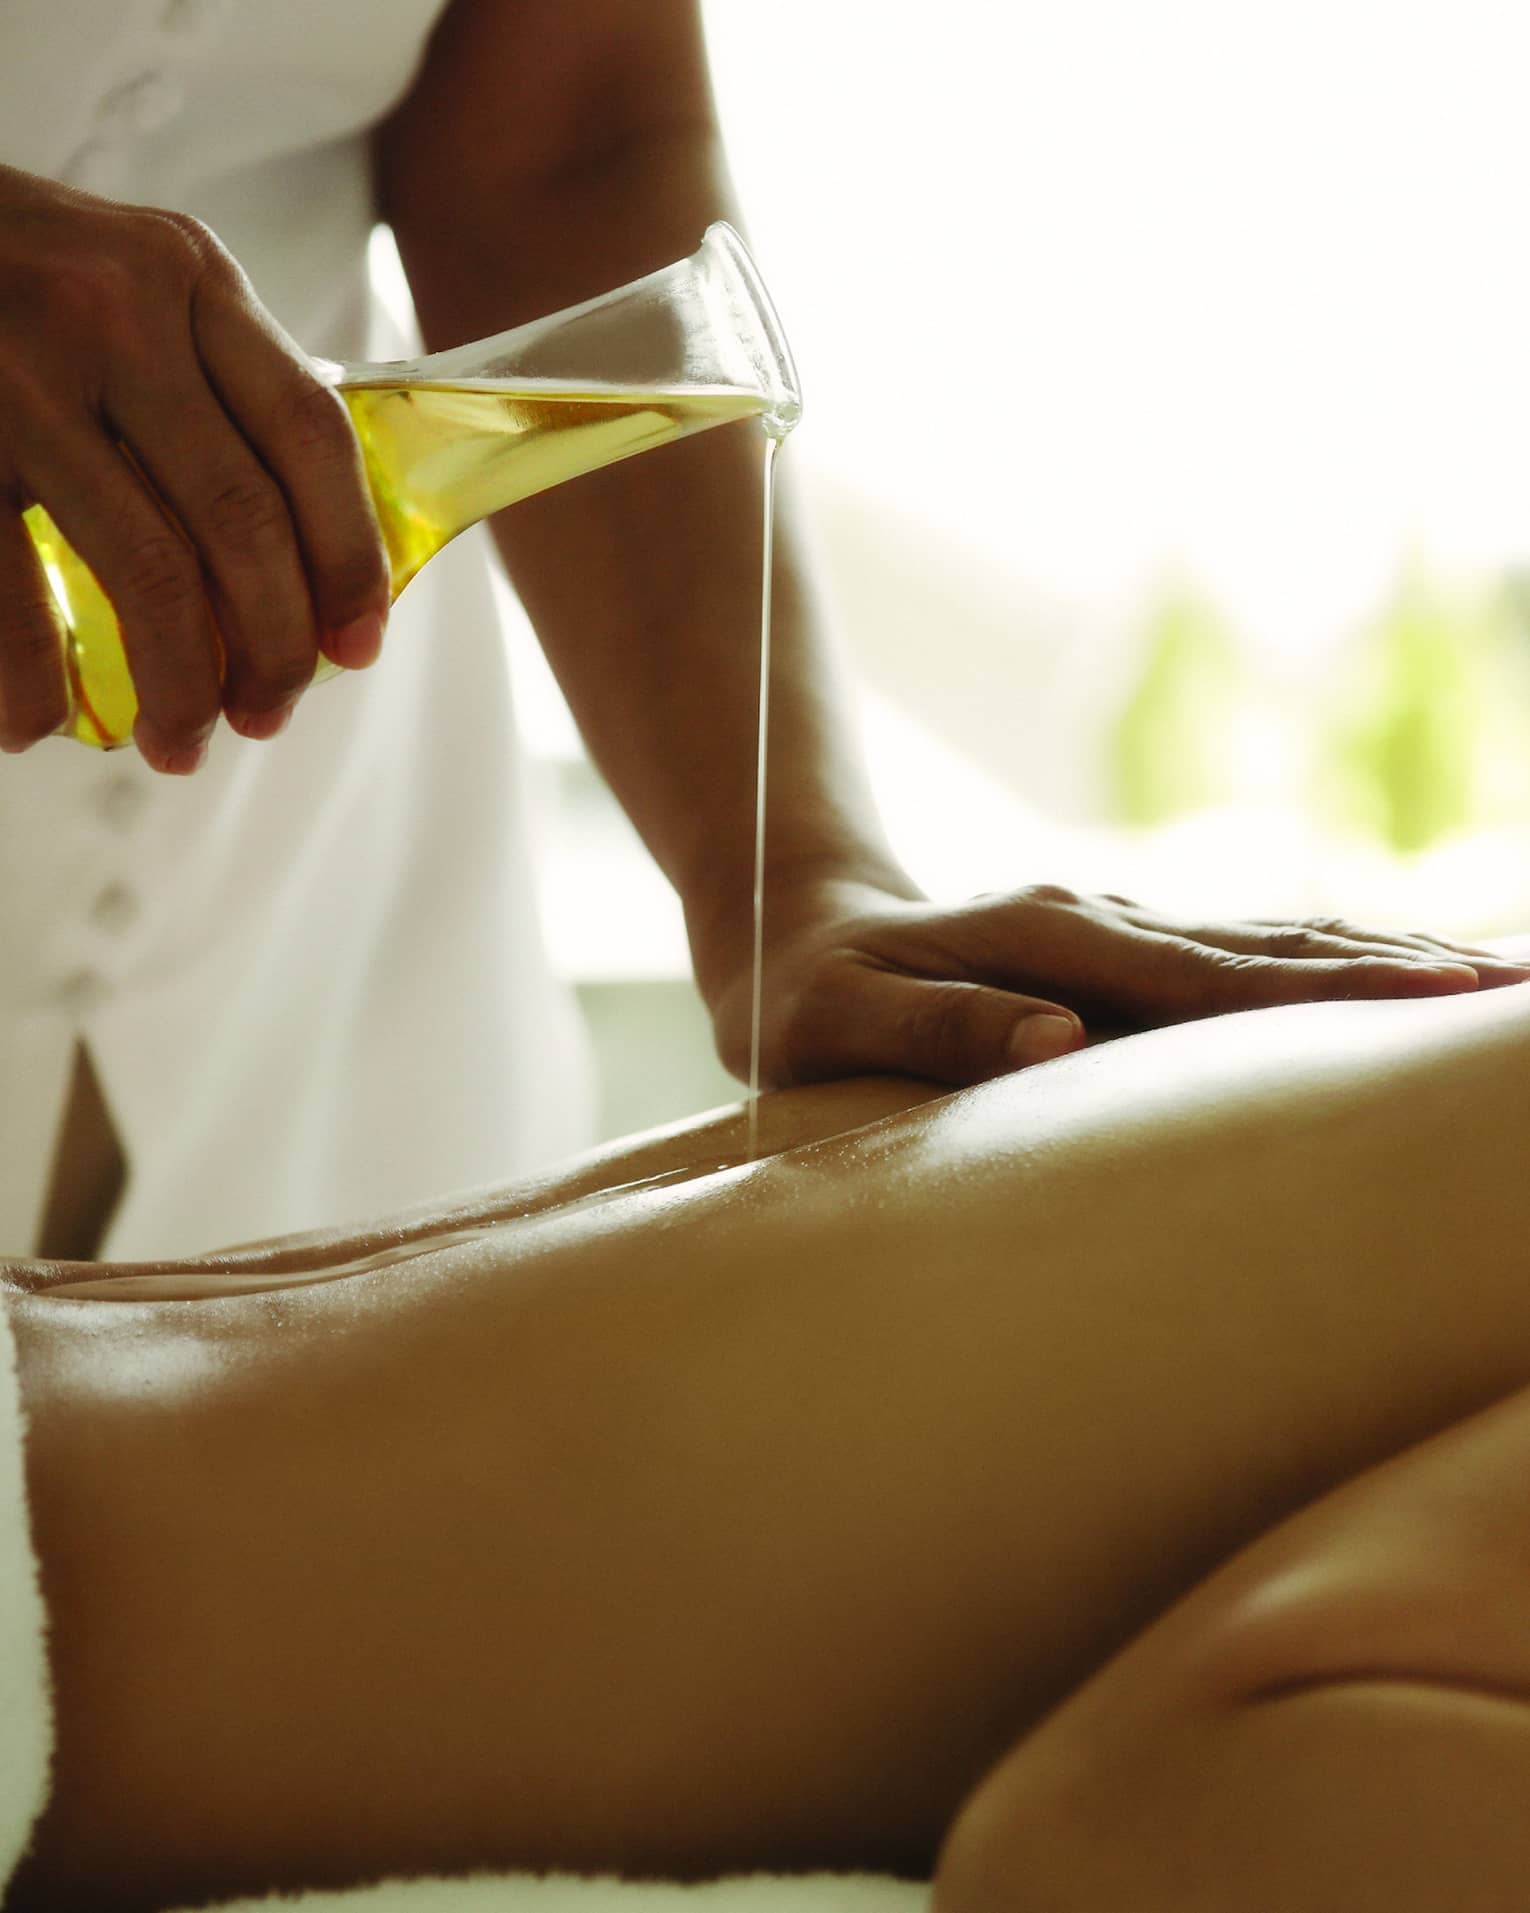 Spa staff pours massage oil over woman's bare back as she lays on treatment bed